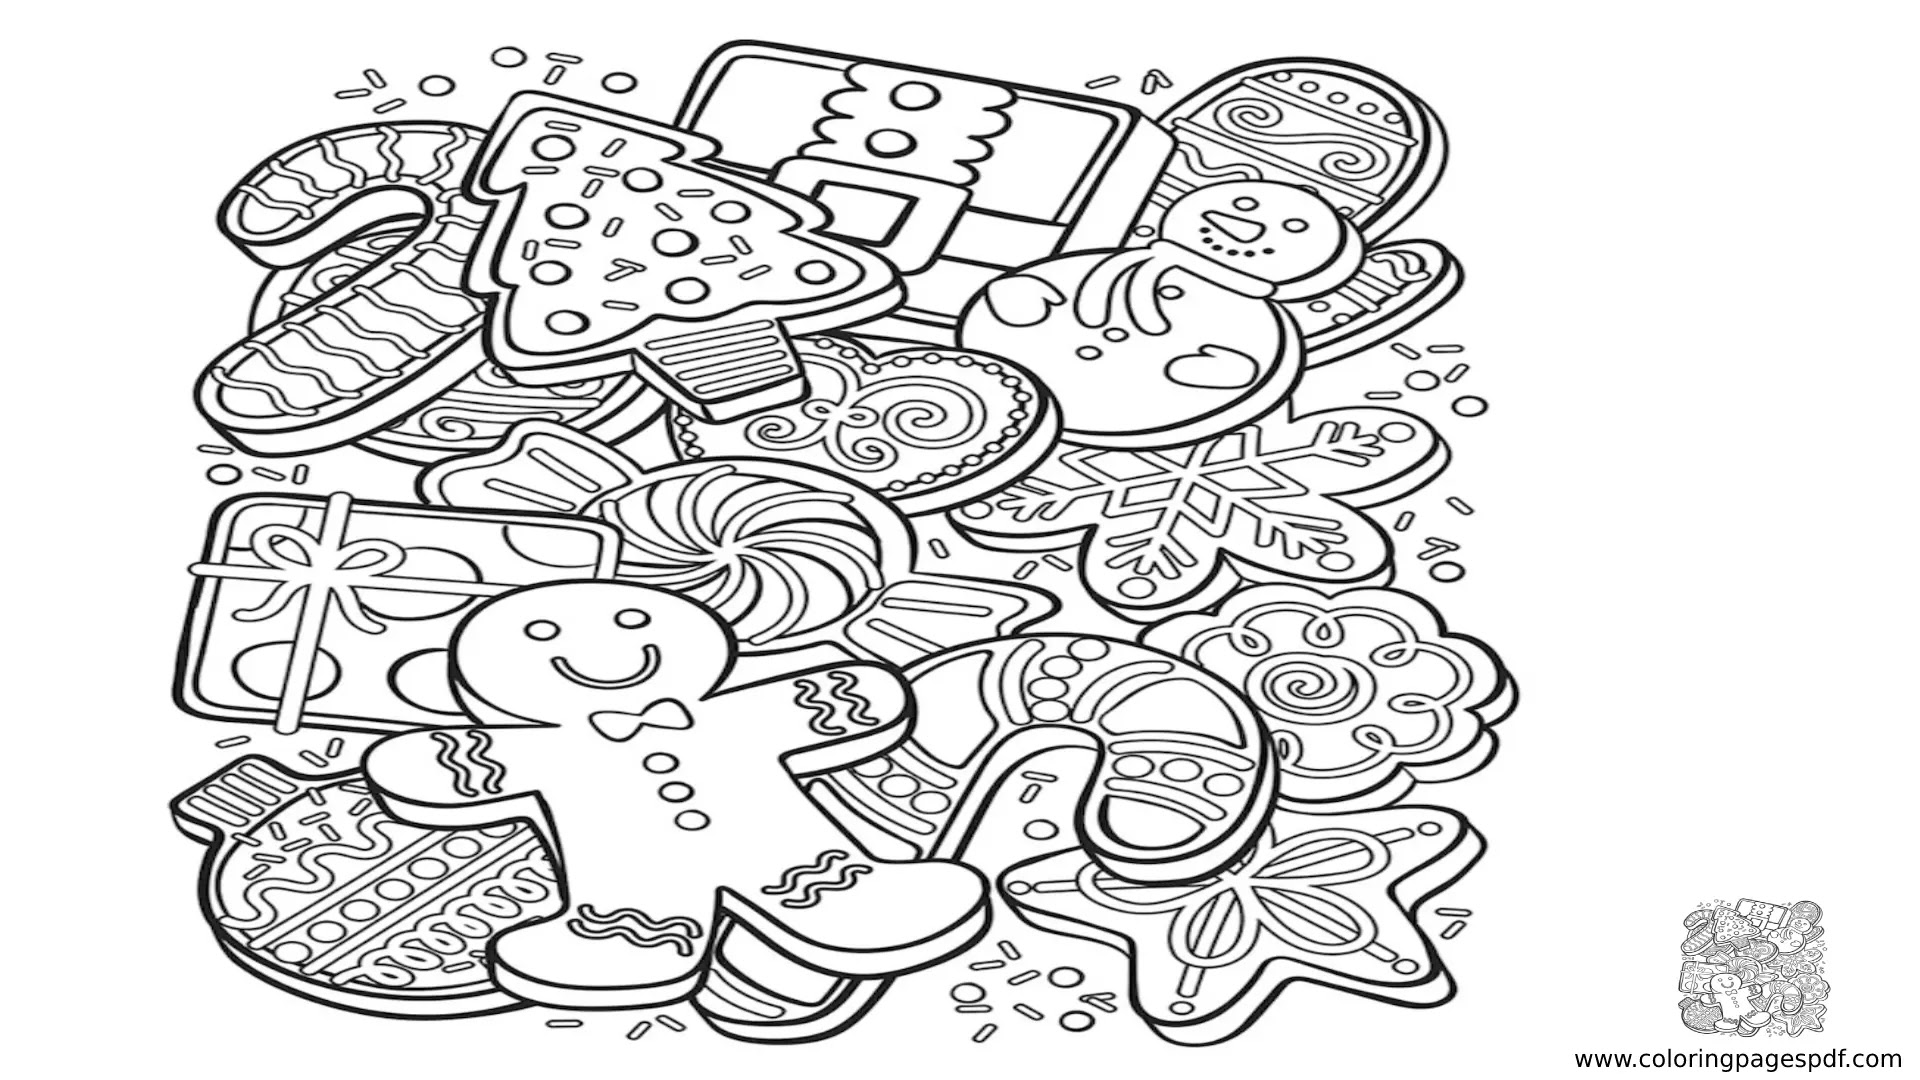 Coloring Page Of Christmas Cookies